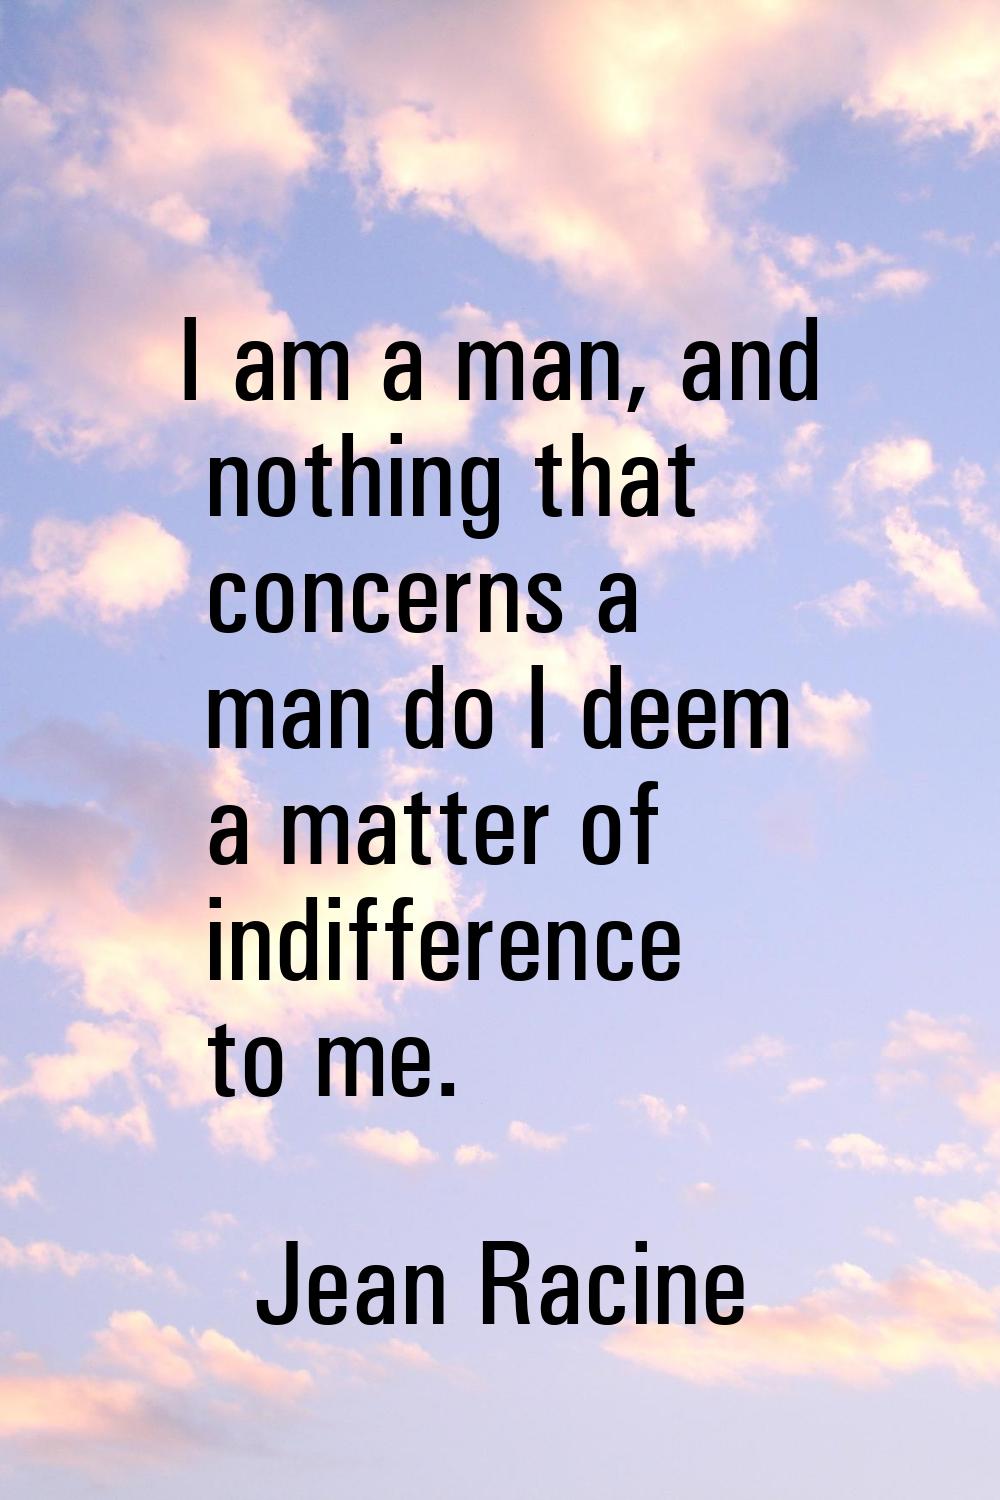 I am a man, and nothing that concerns a man do I deem a matter of indifference to me.